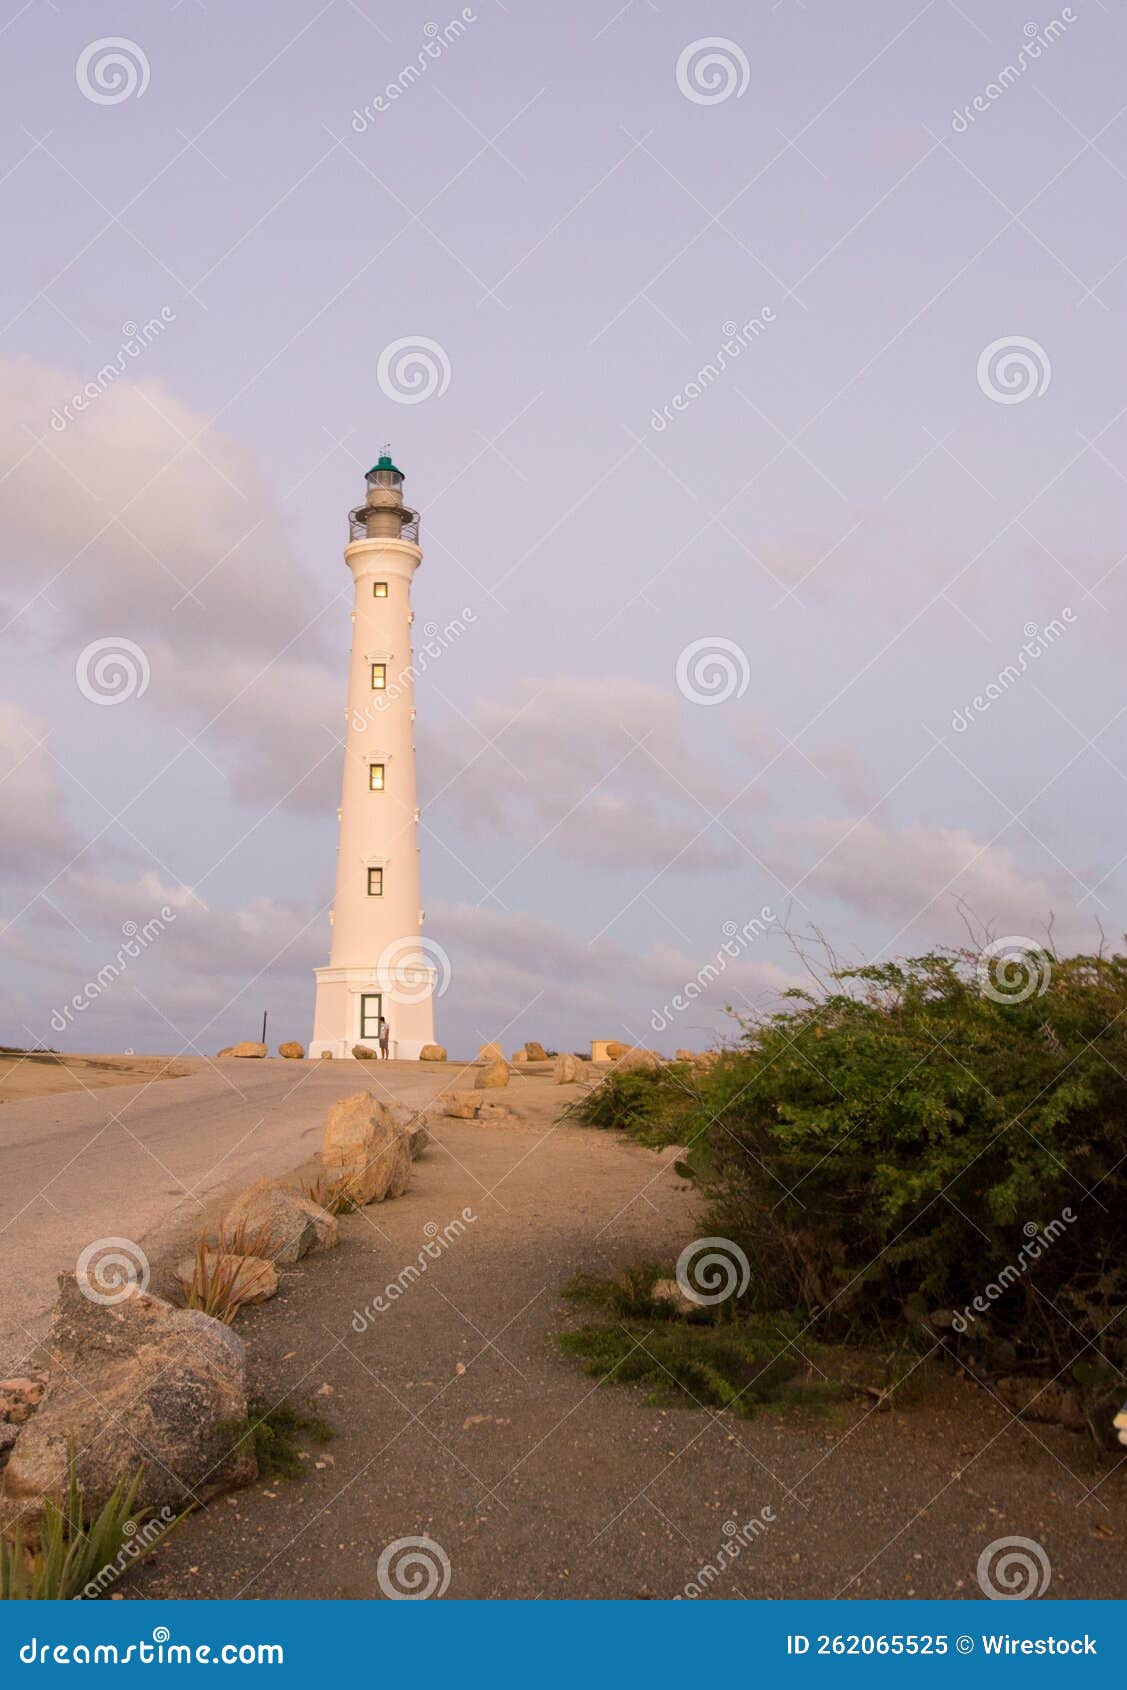 vertical shot of the califonia lighthouse in aruba, netherlands